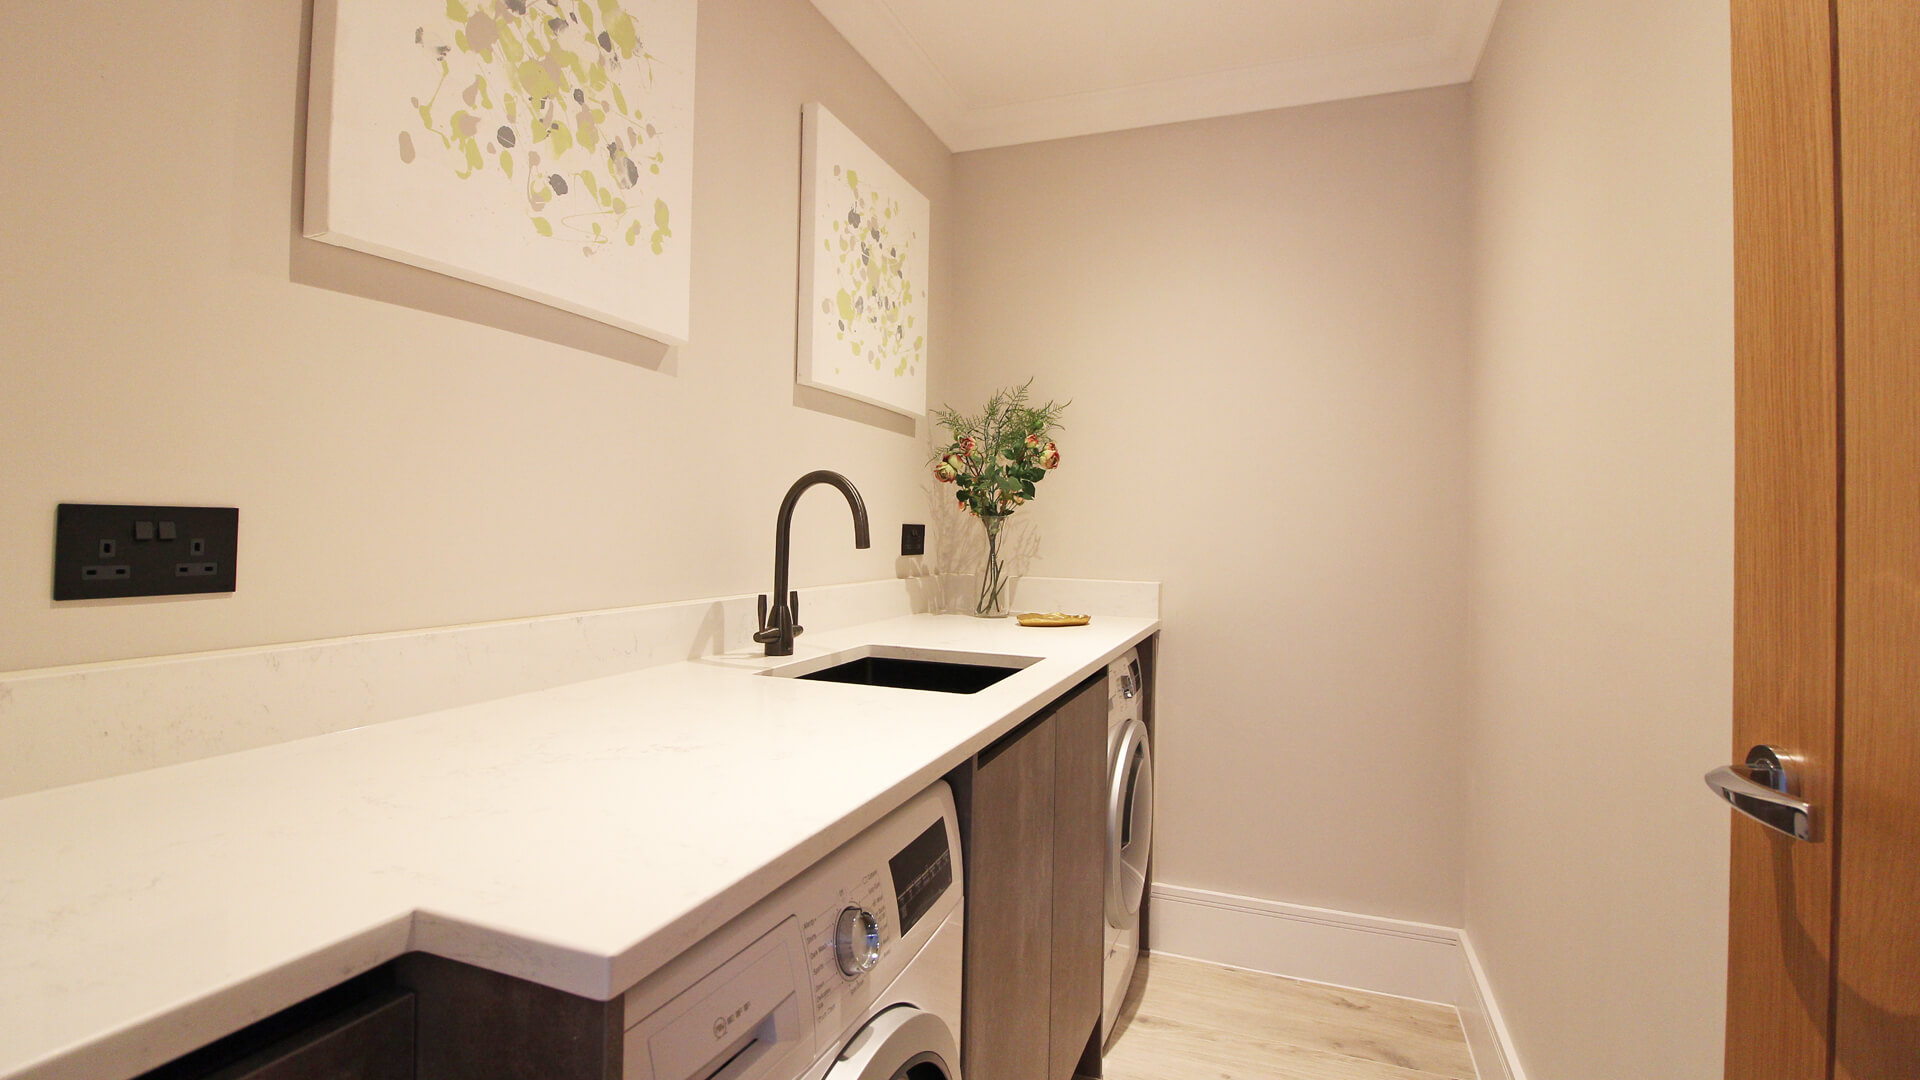 Utility room with sink and appliances at Plot 10 Weavers park.